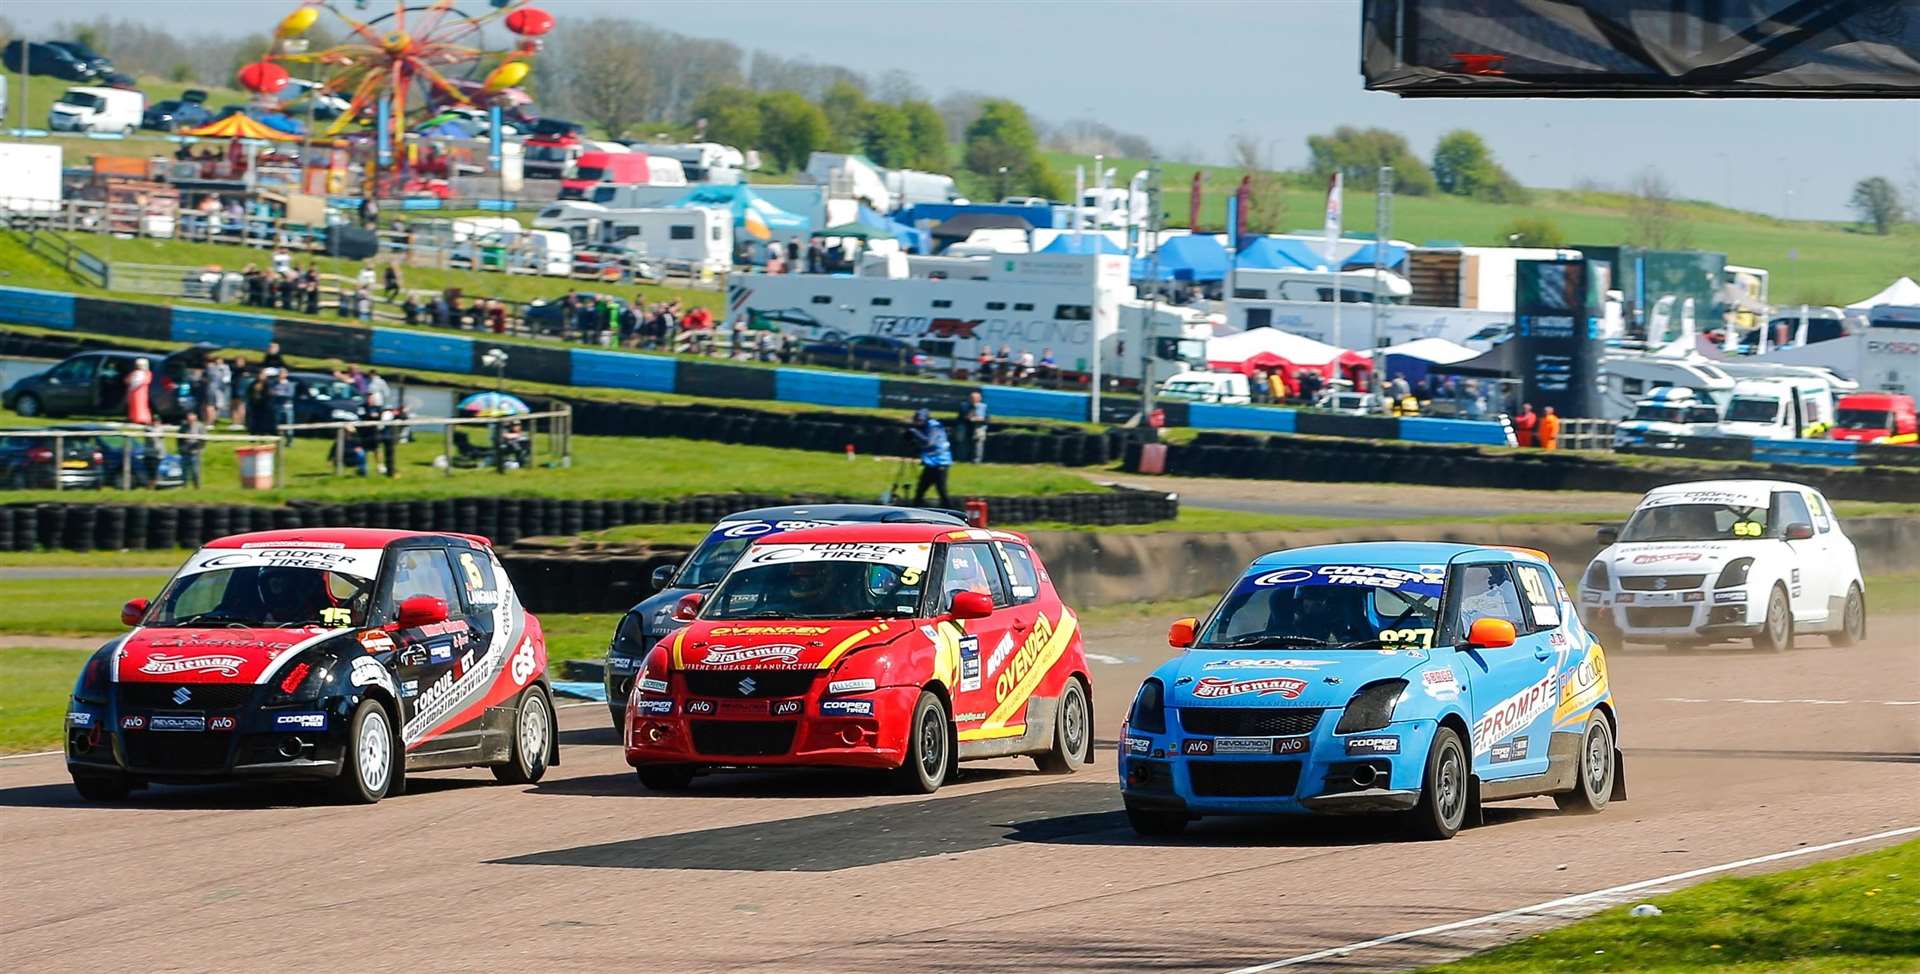 Adisham's Will Ovenden, centre, was second in Saturday's opening round of the Junior RX category at Lydden Hill. Picture: British Rallycross